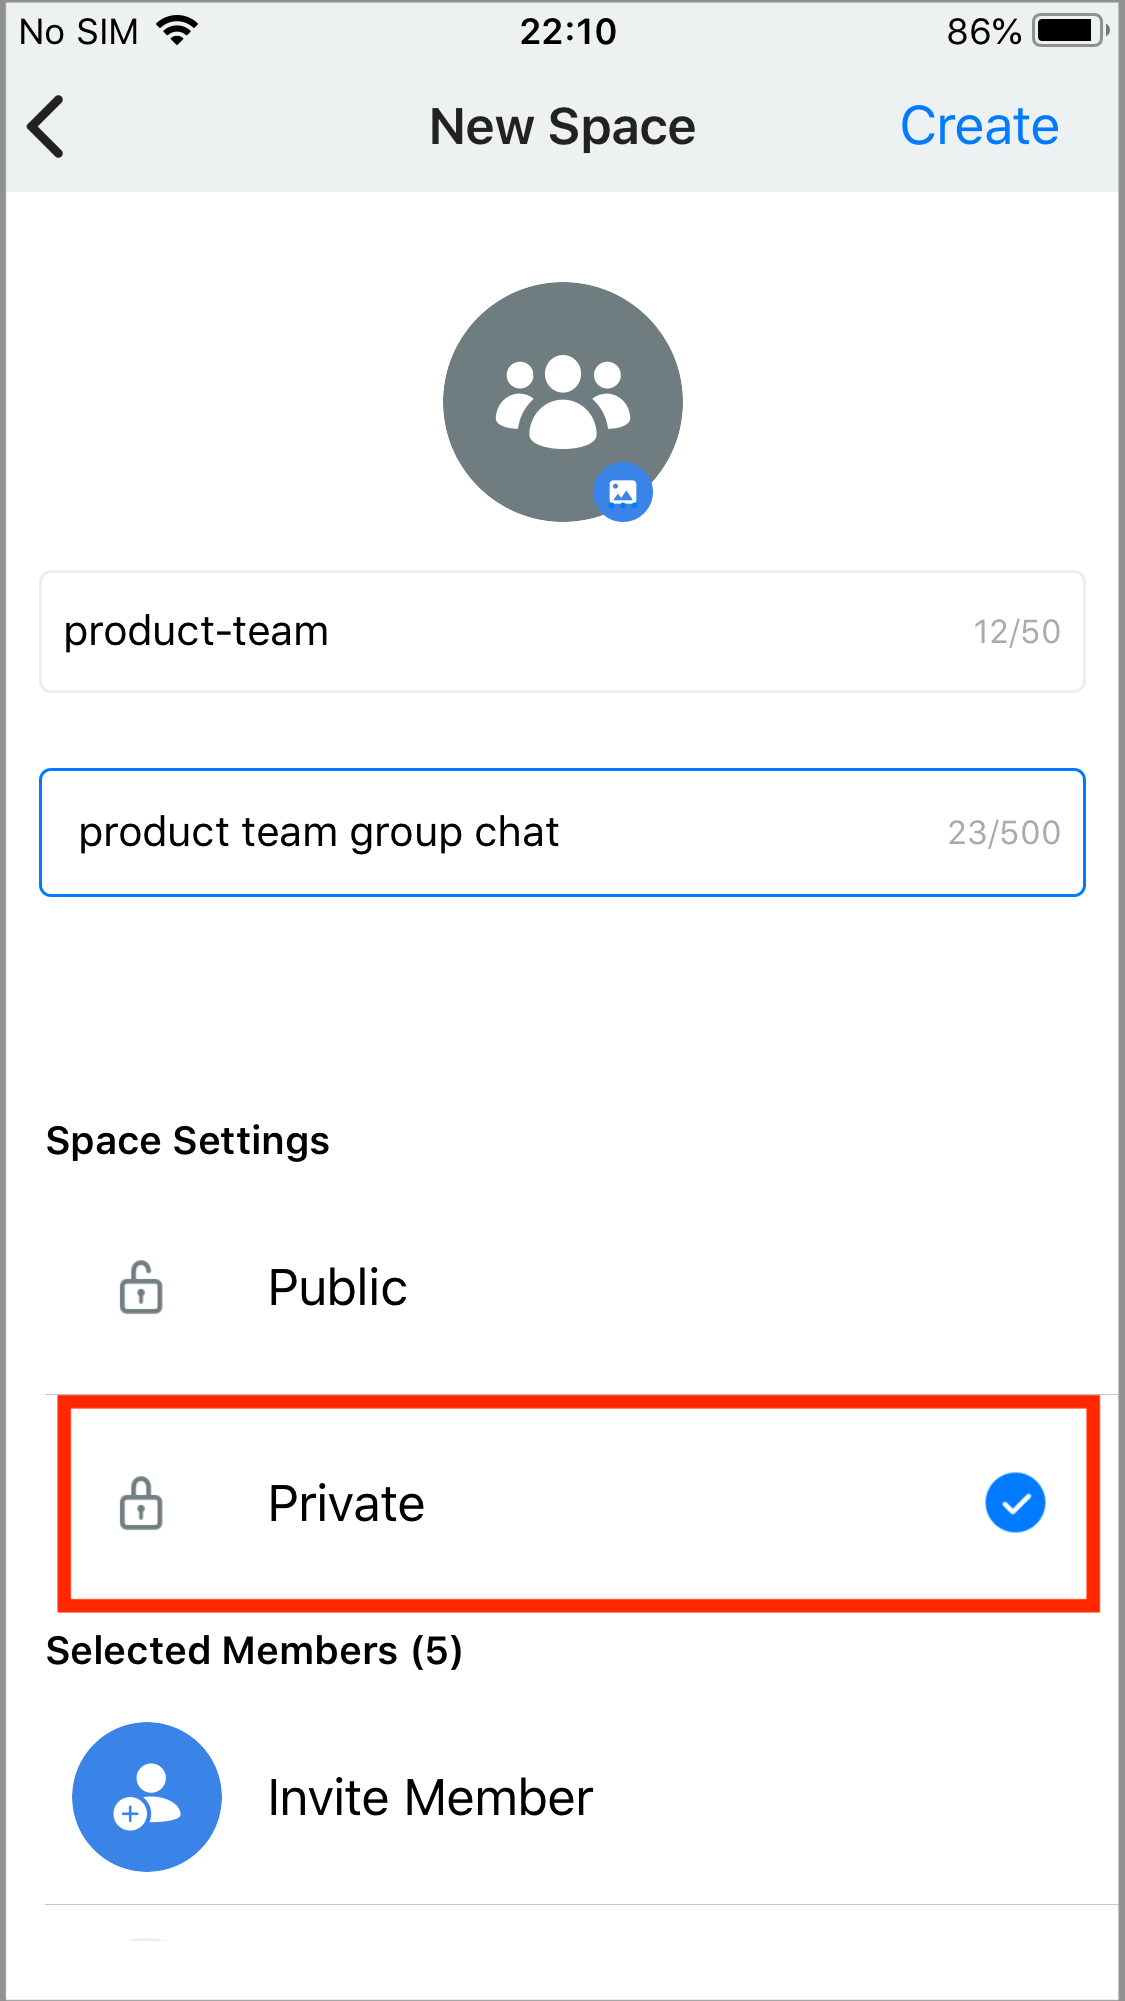 Selecting the Private Space setting